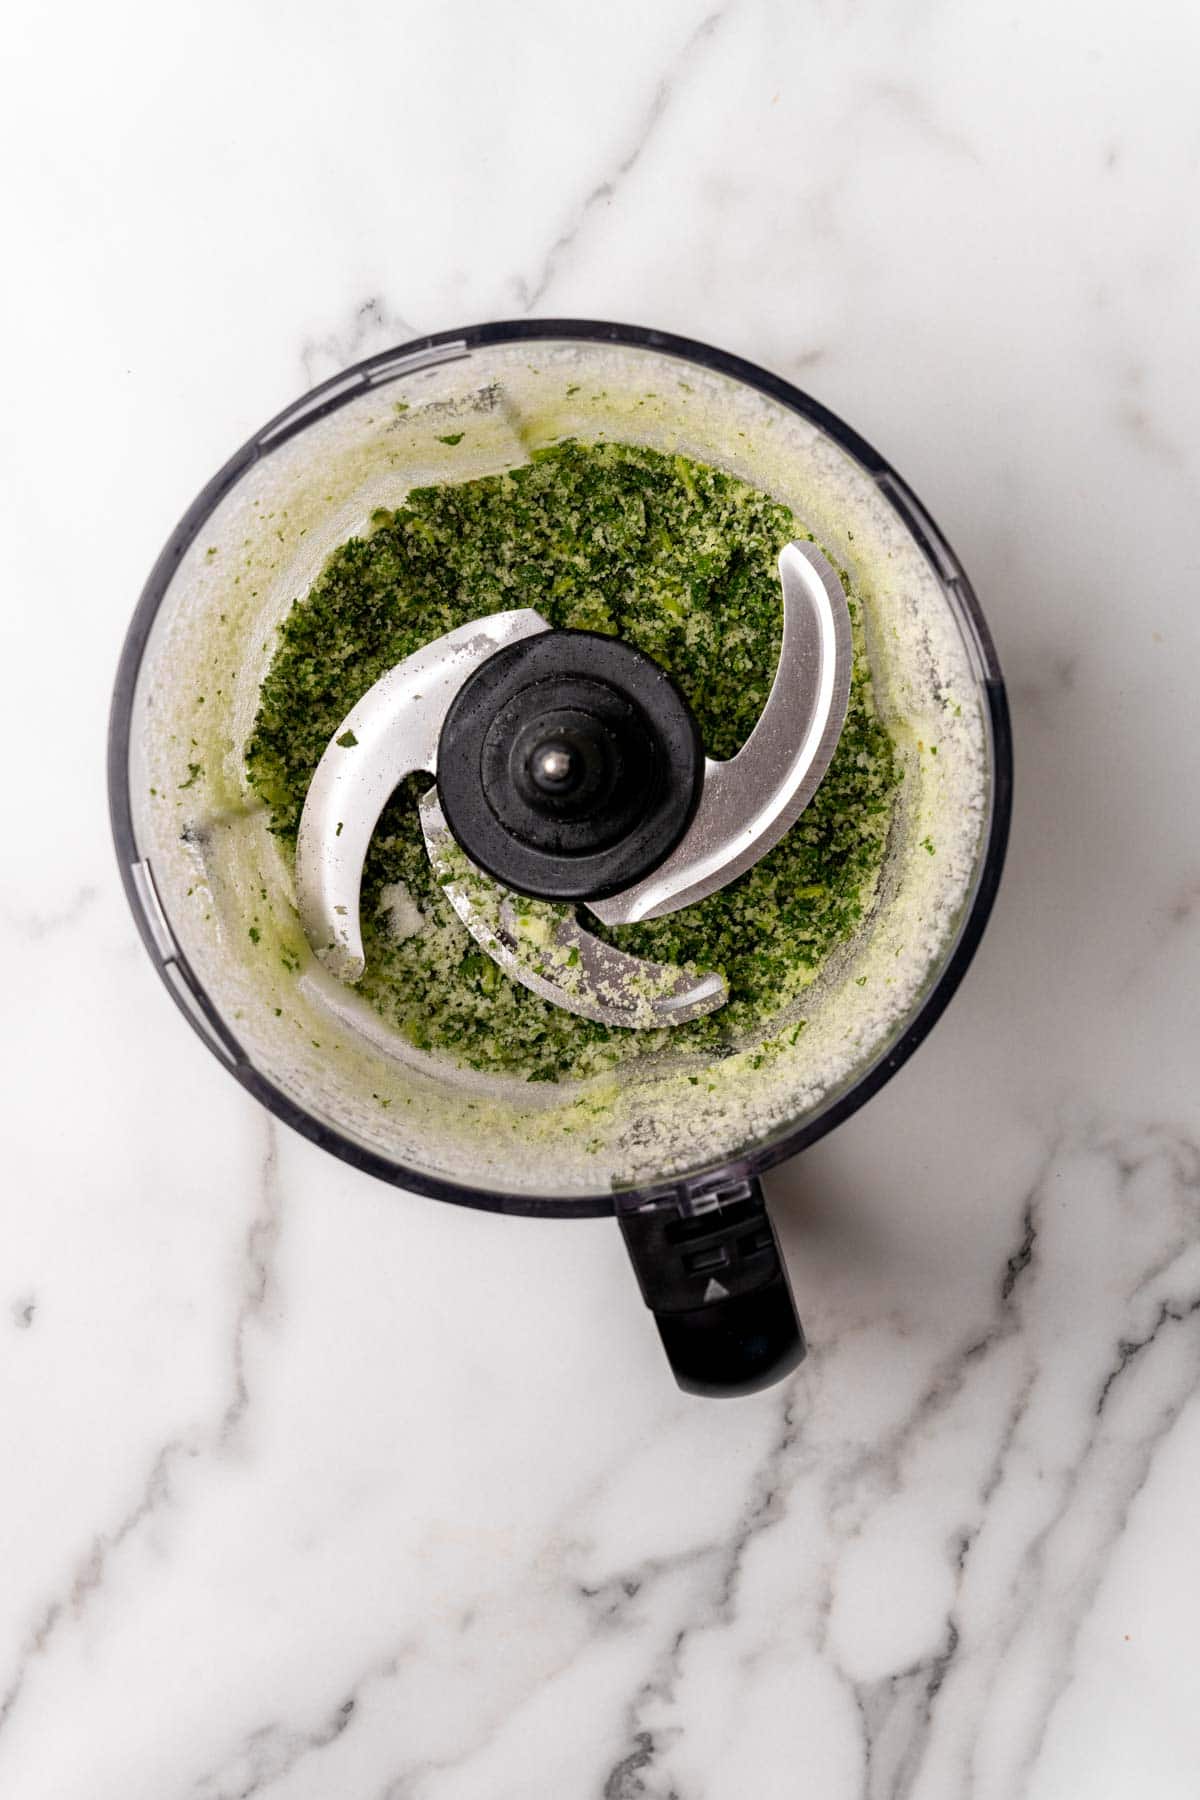 Blended basil and salt in a food processor